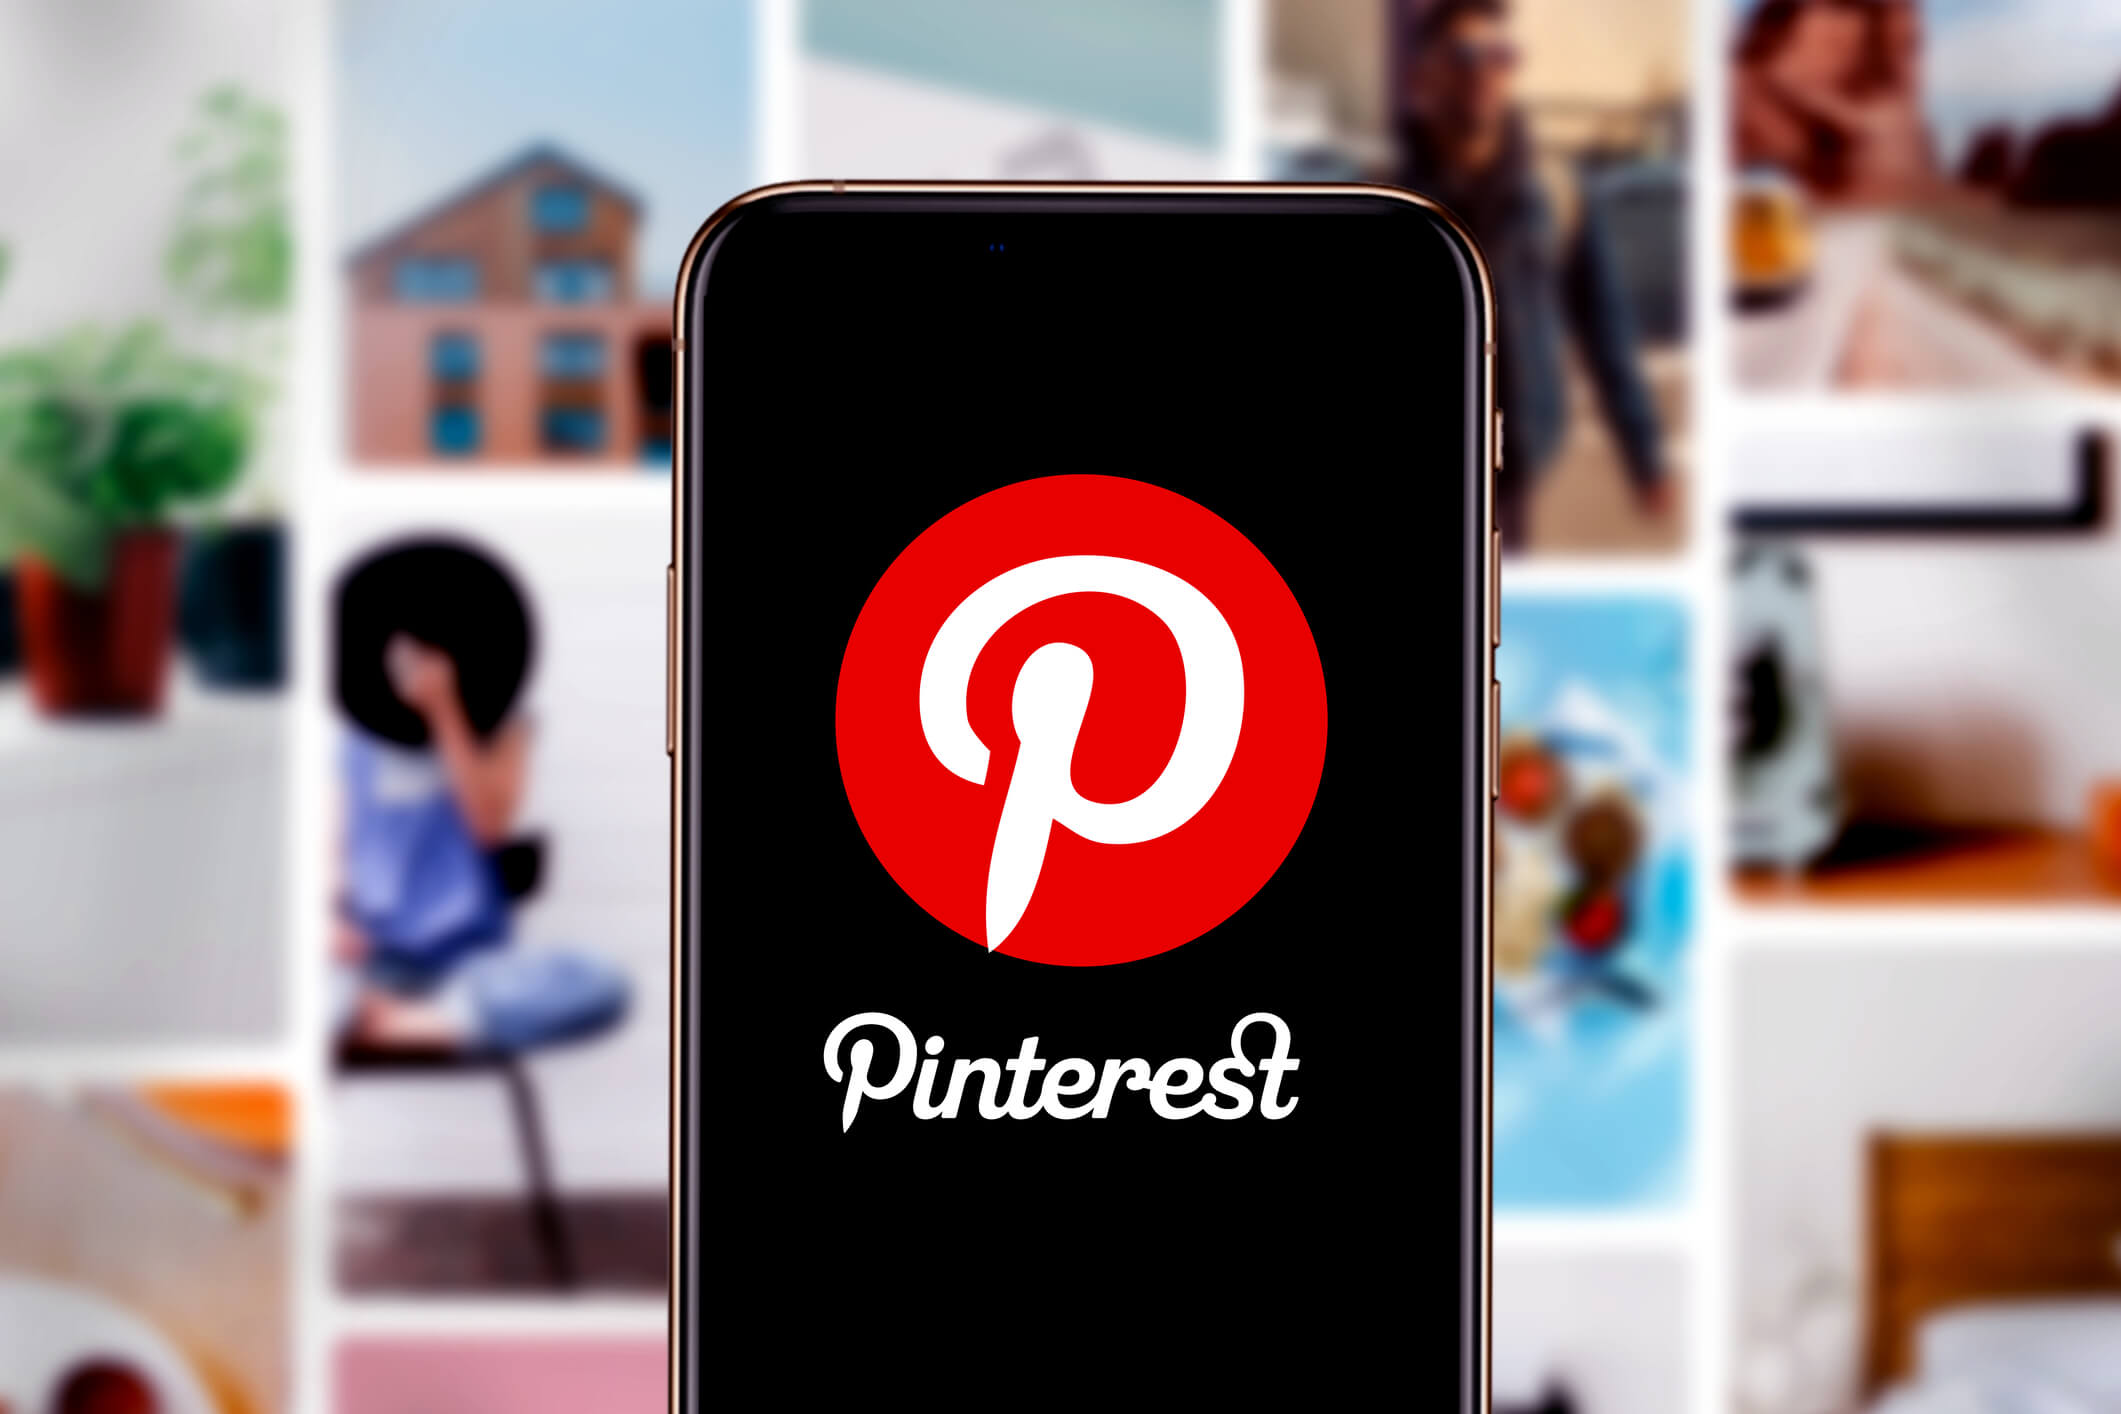 The Pinterest logo is displayed on a mobile phone with Pinterest boards in the background